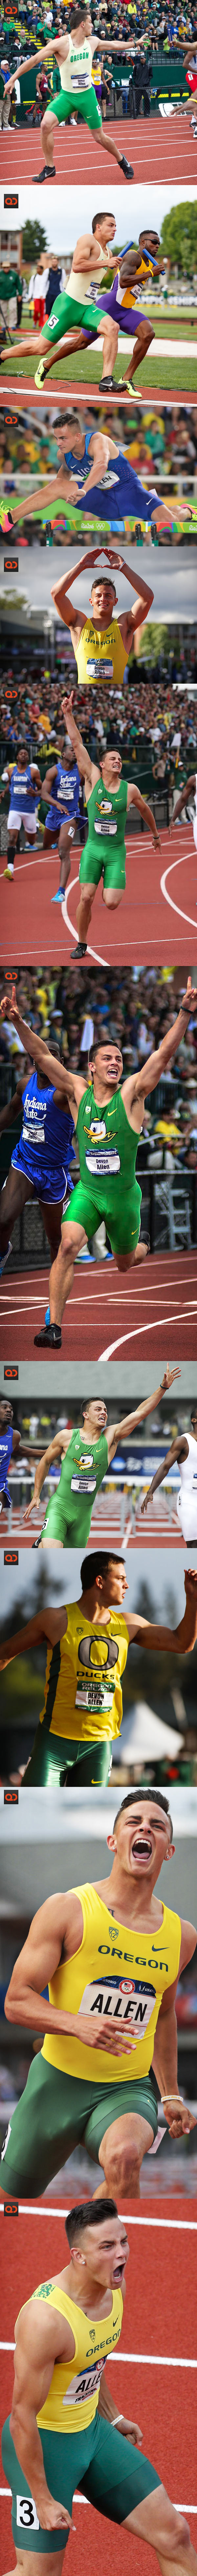 Devon Allen, American Athlete, Getting Up Close And Personal With His Bulge!